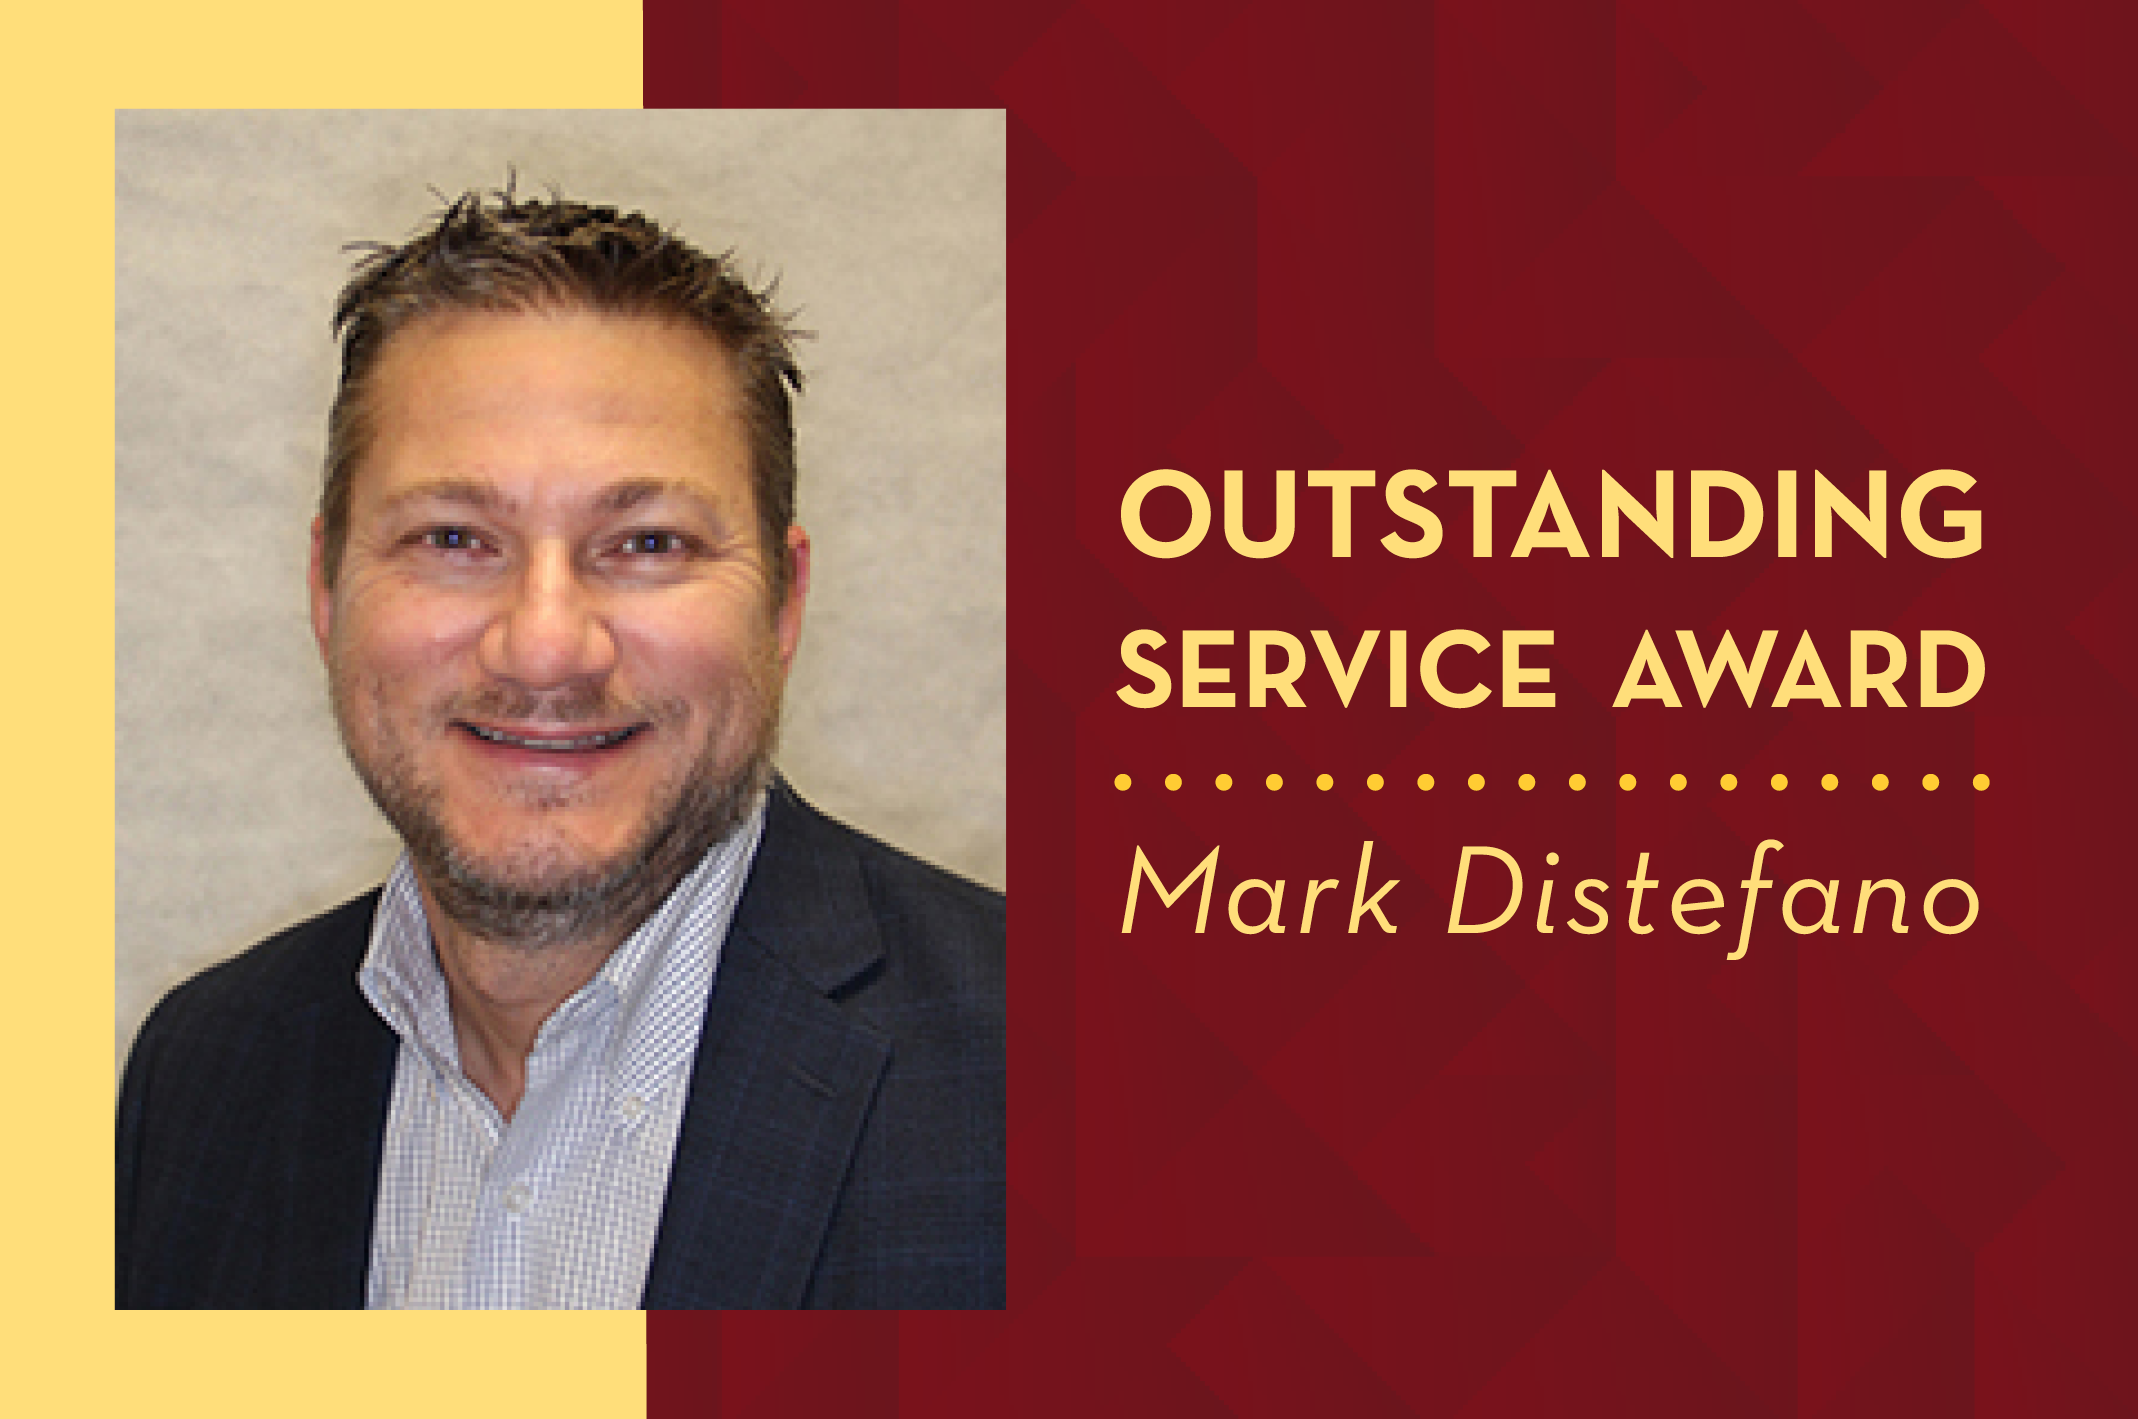 Photo of Mark Distefano on a maroon and gold Outstanding Service Award background